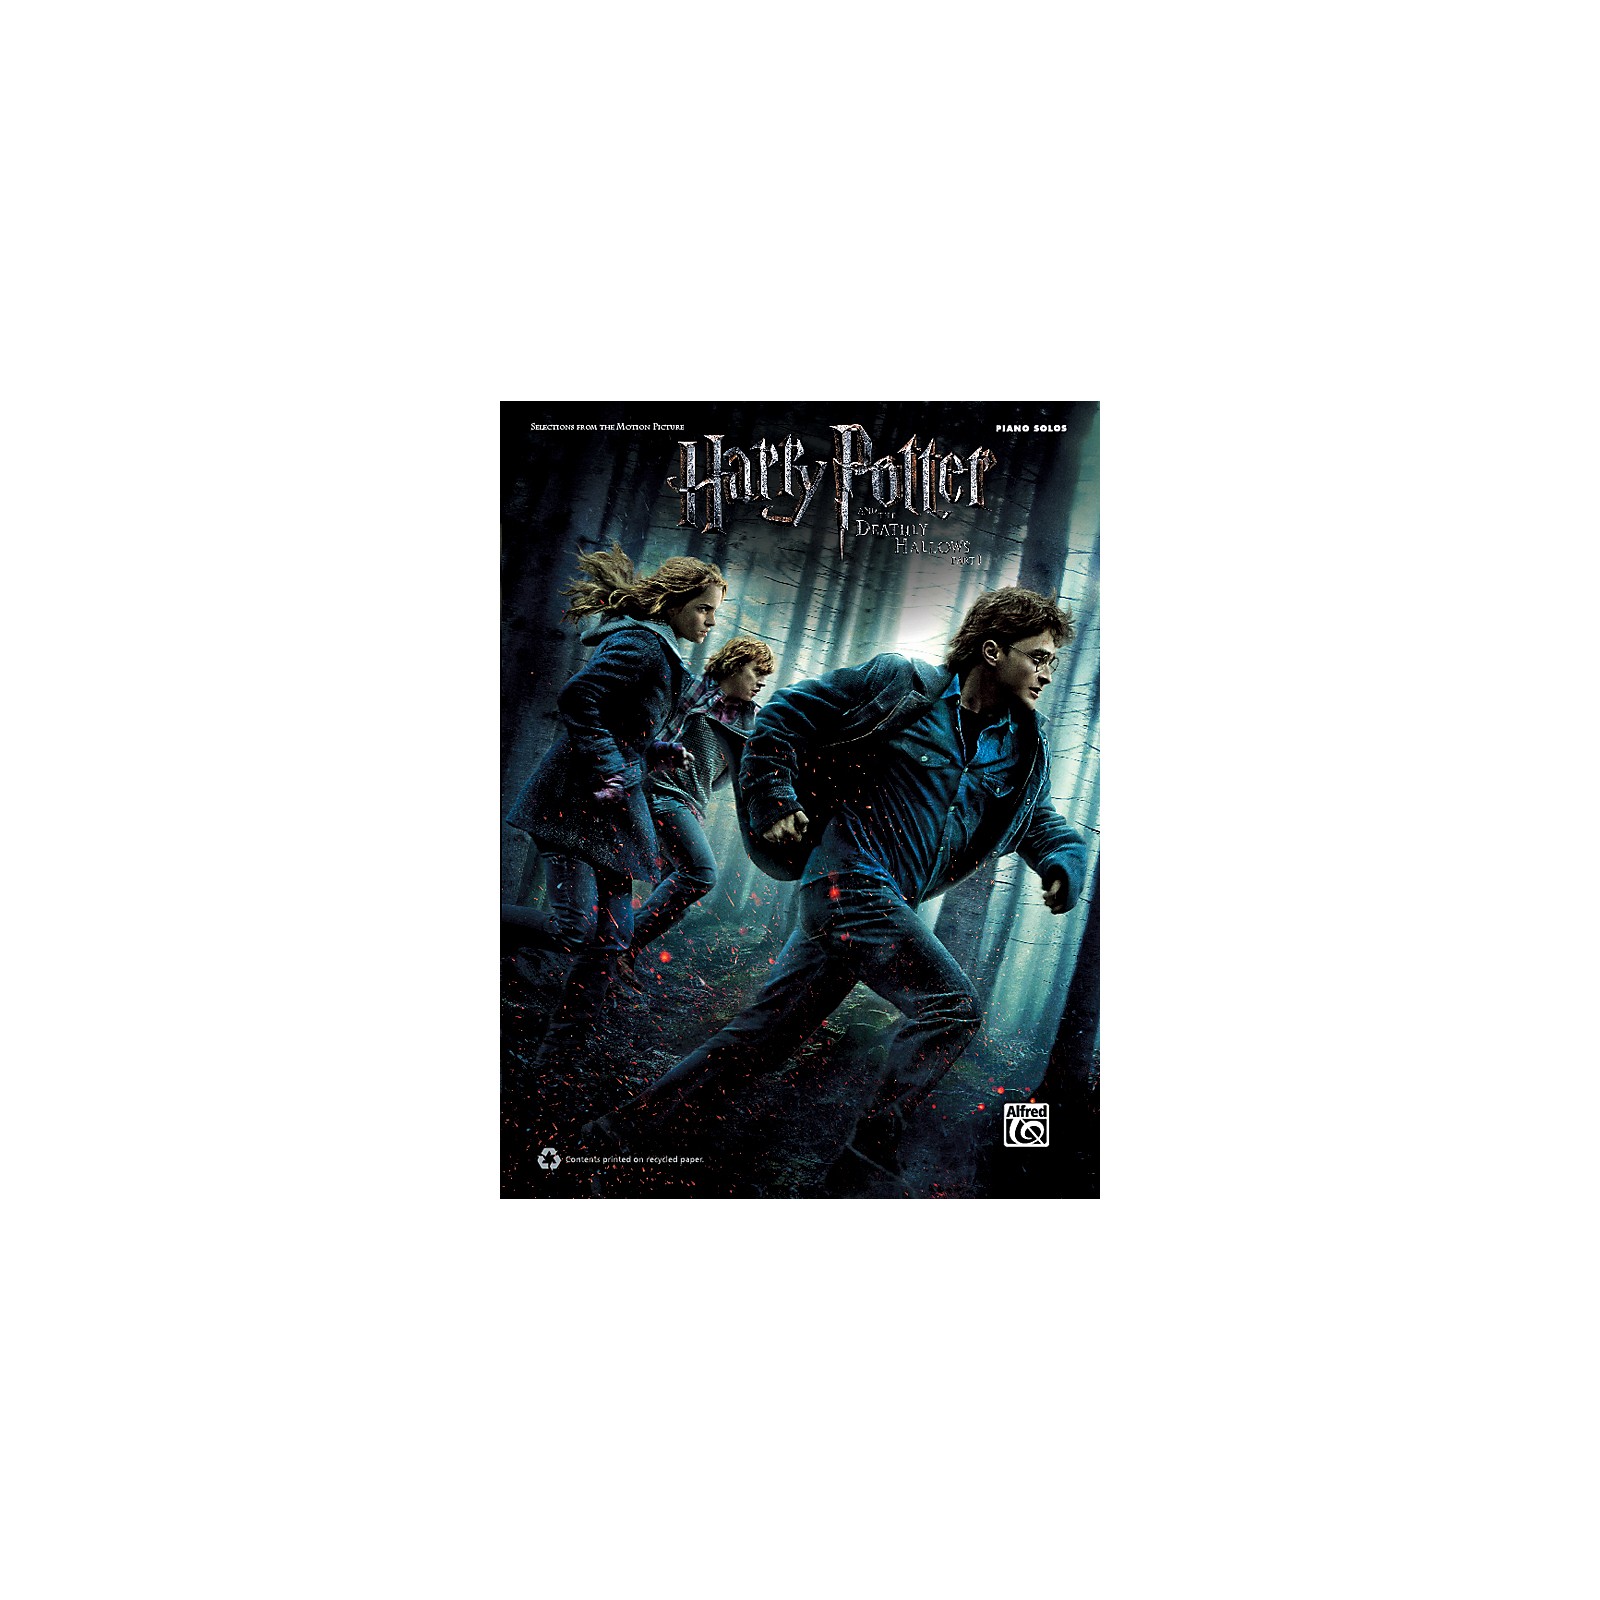 harry potter and the deathly hallows 1 cd cover